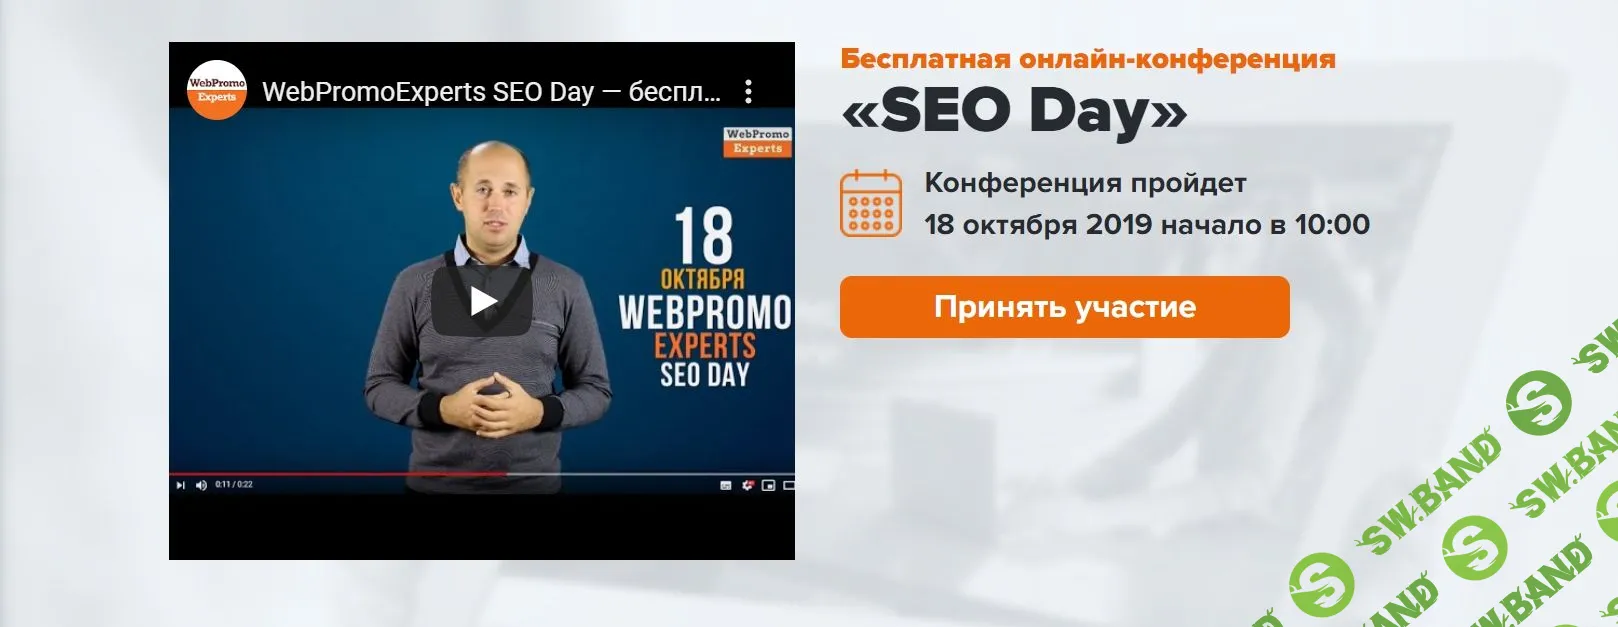 [WebPromoExperts] SEO Day - 2019